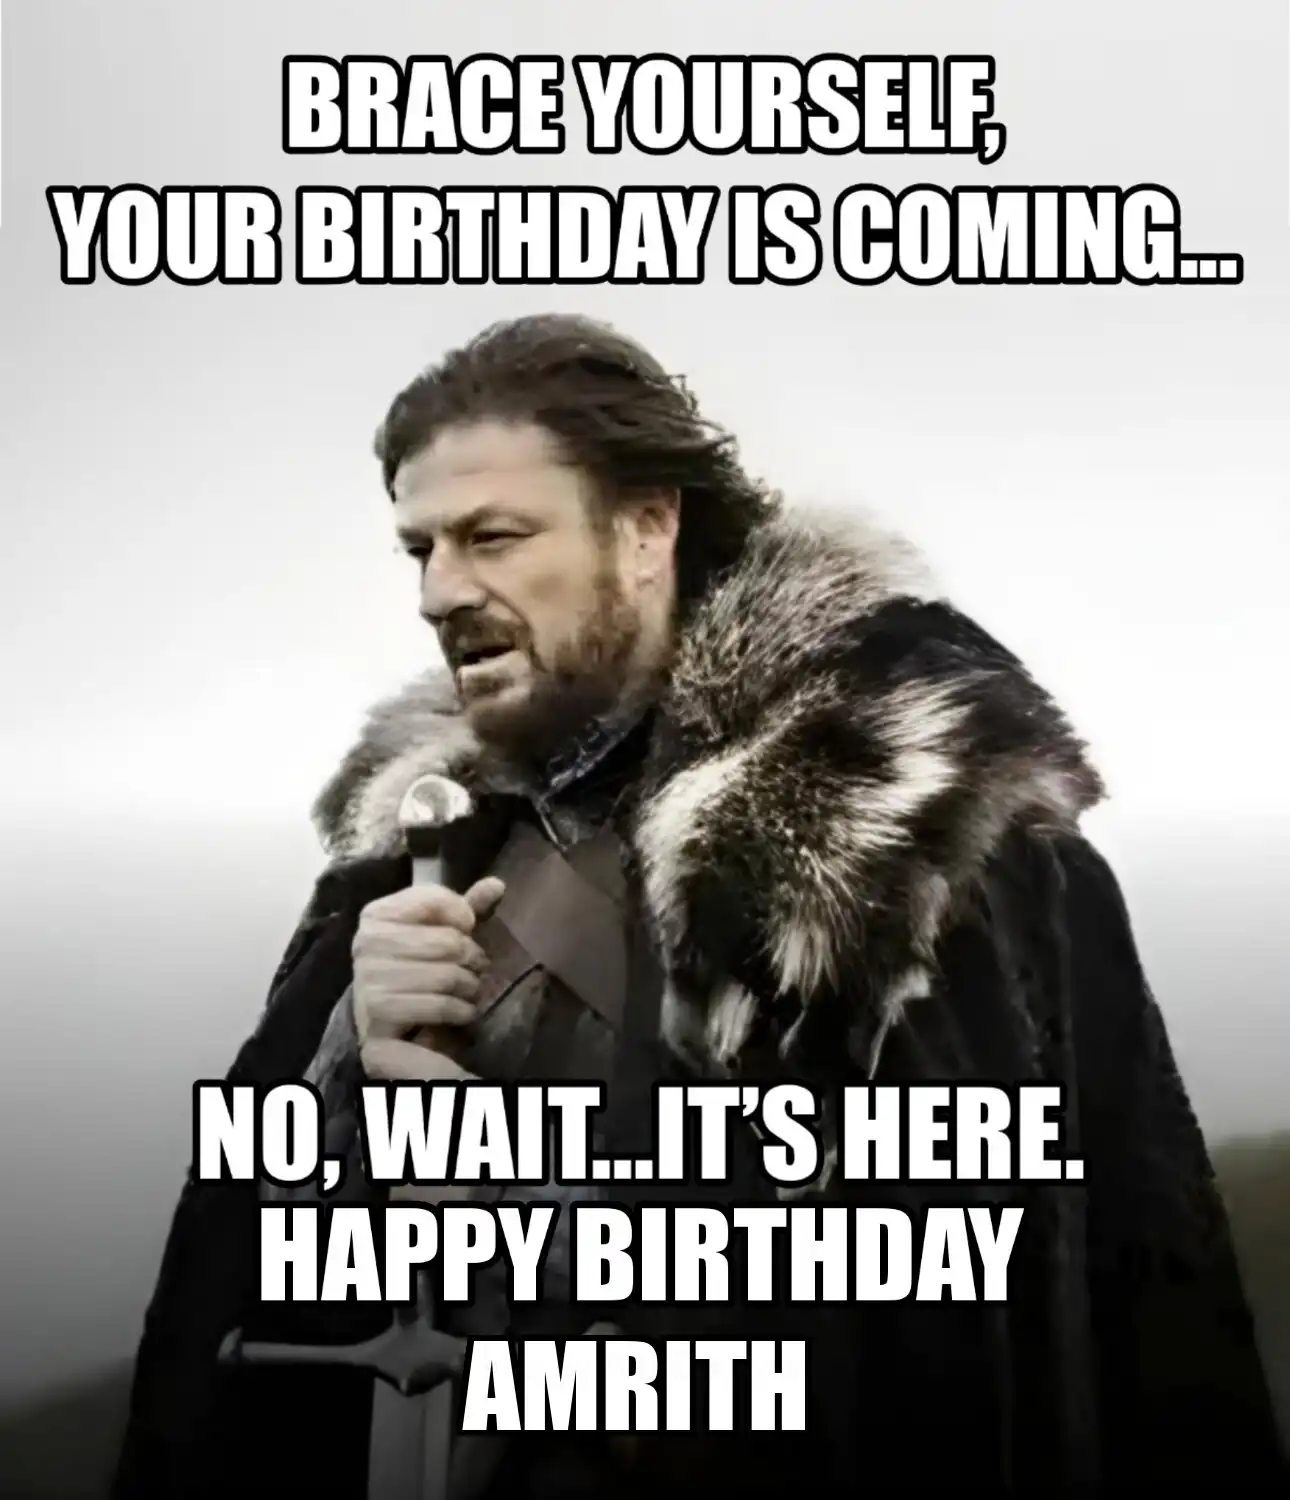 Happy Birthday Amrith Brace Yourself Your Birthday Is Coming Meme